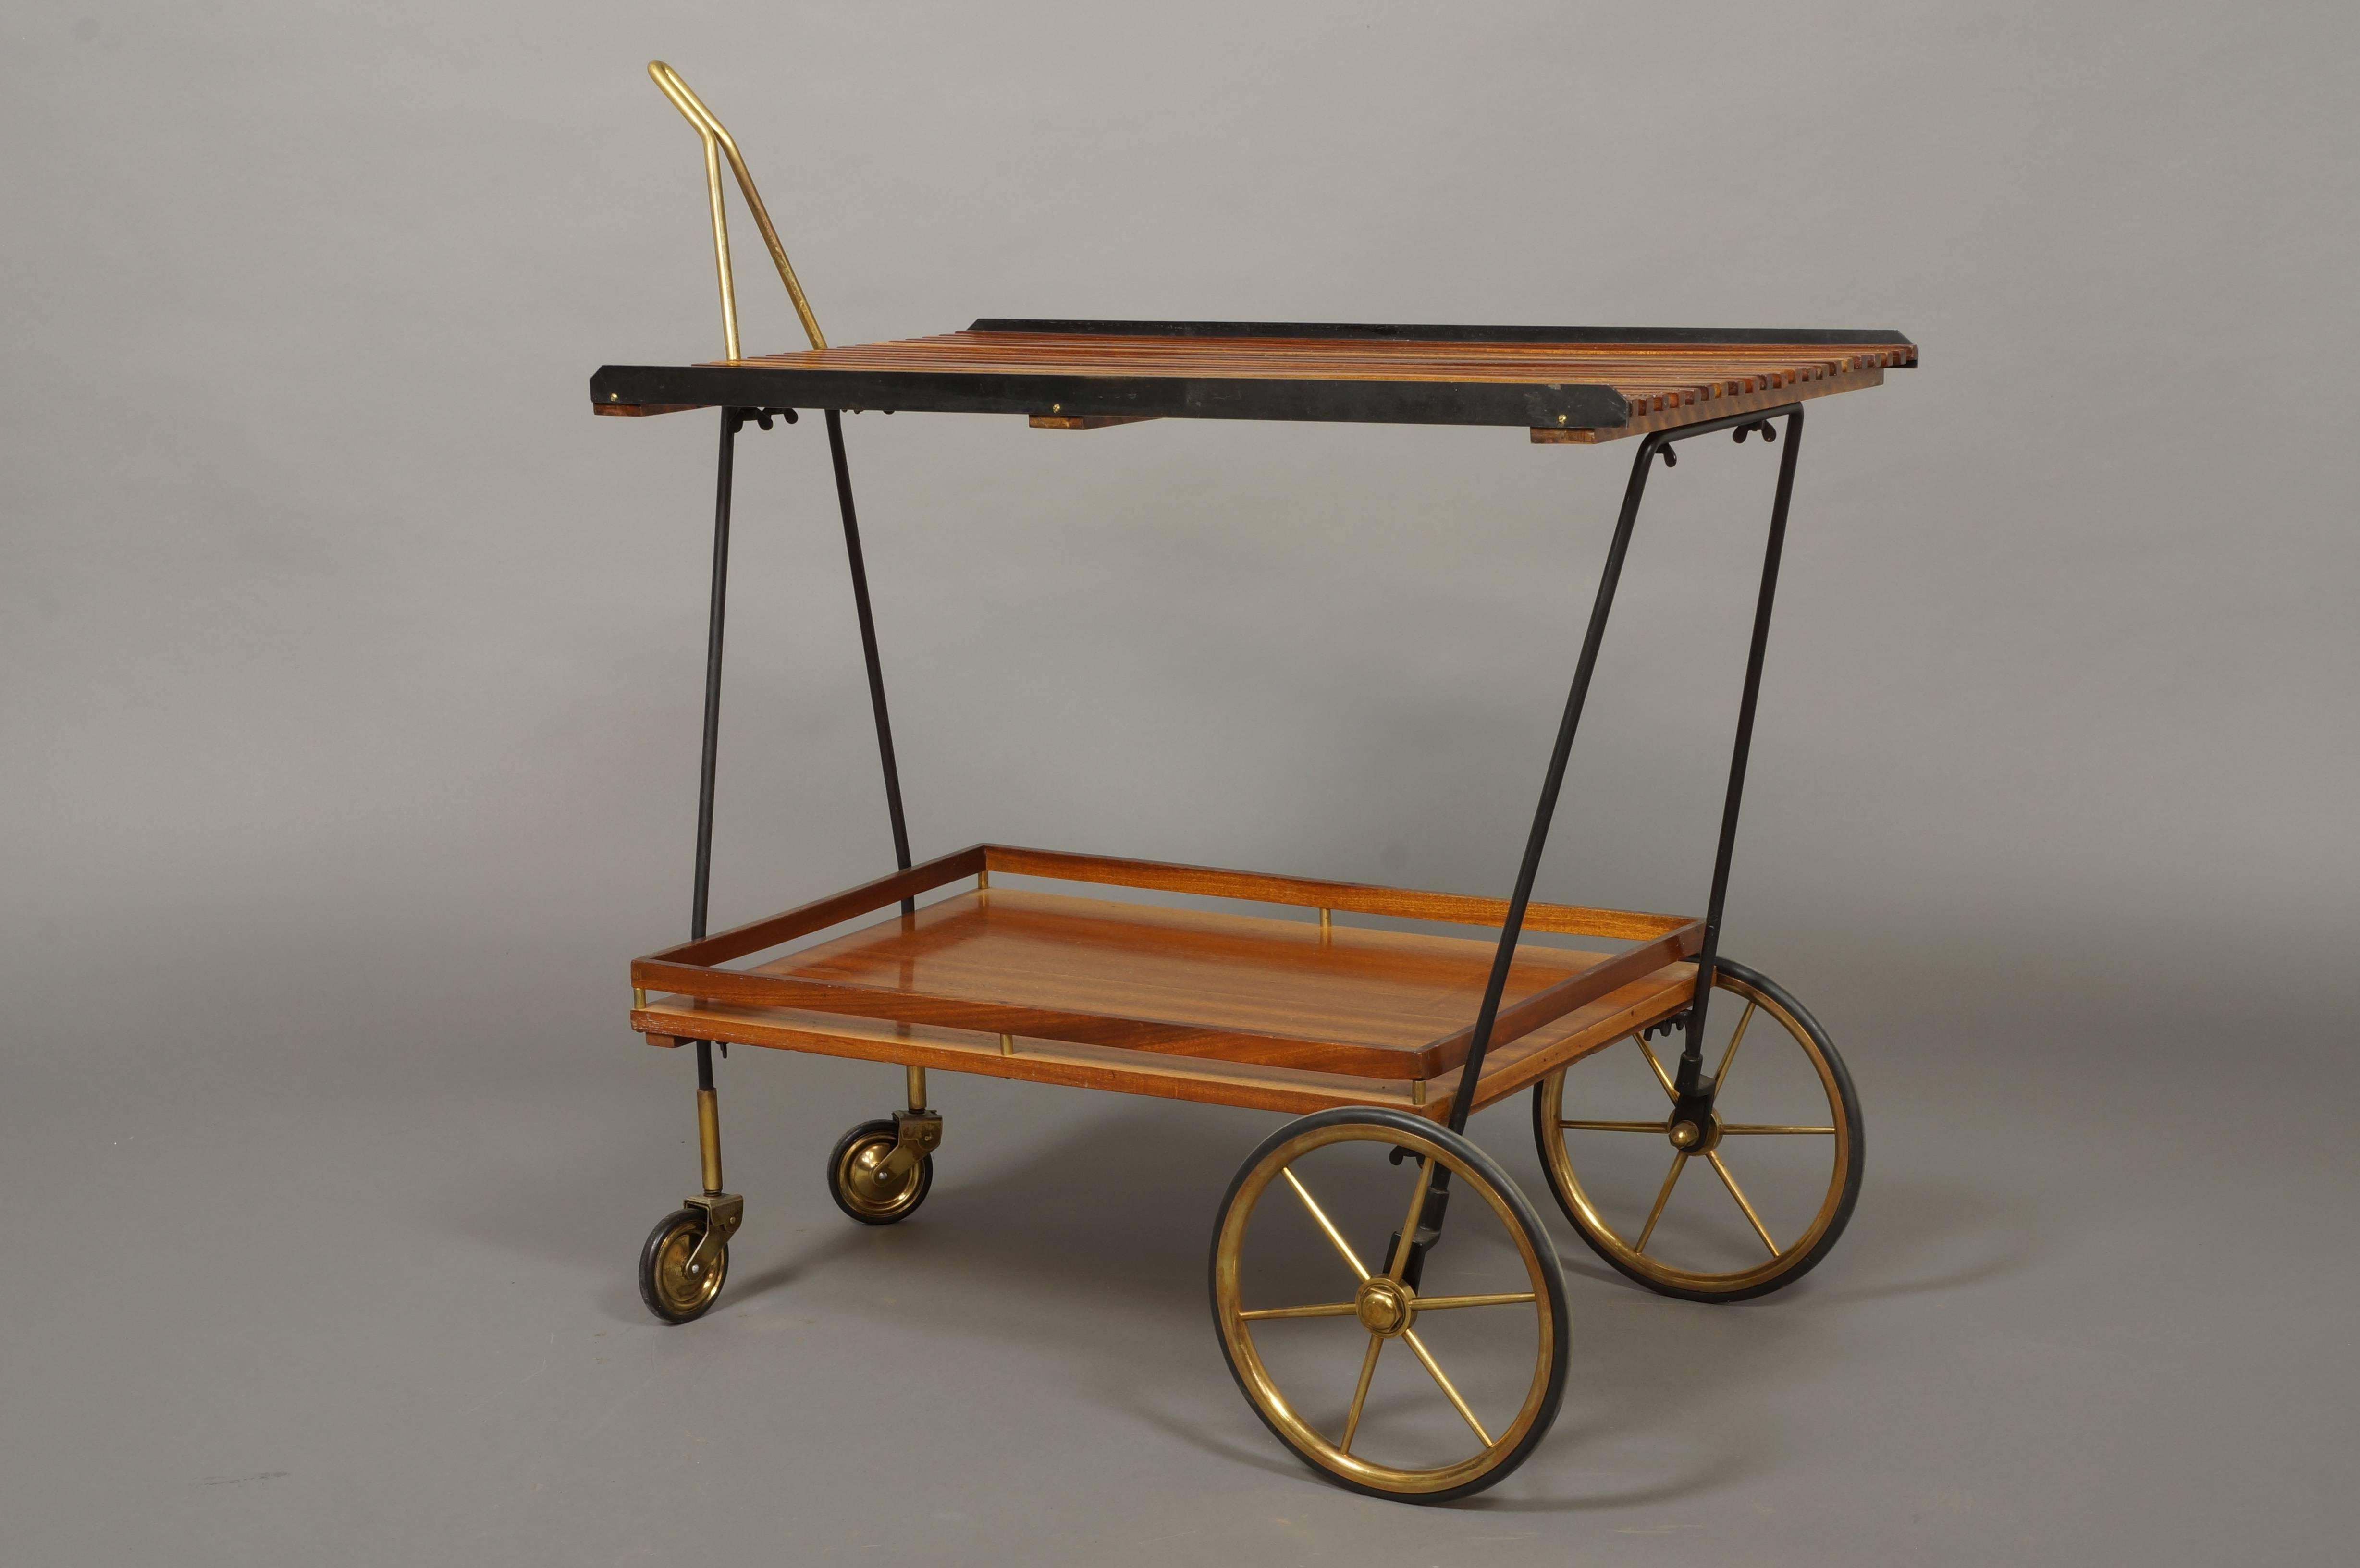 Italian rosewood drinks trolley/bar cart with brass handle and wheels. Top tray has slatted rosewood wood design with blackened steel edge. Lower tray has rosewood and brass gallery, circa 1950.